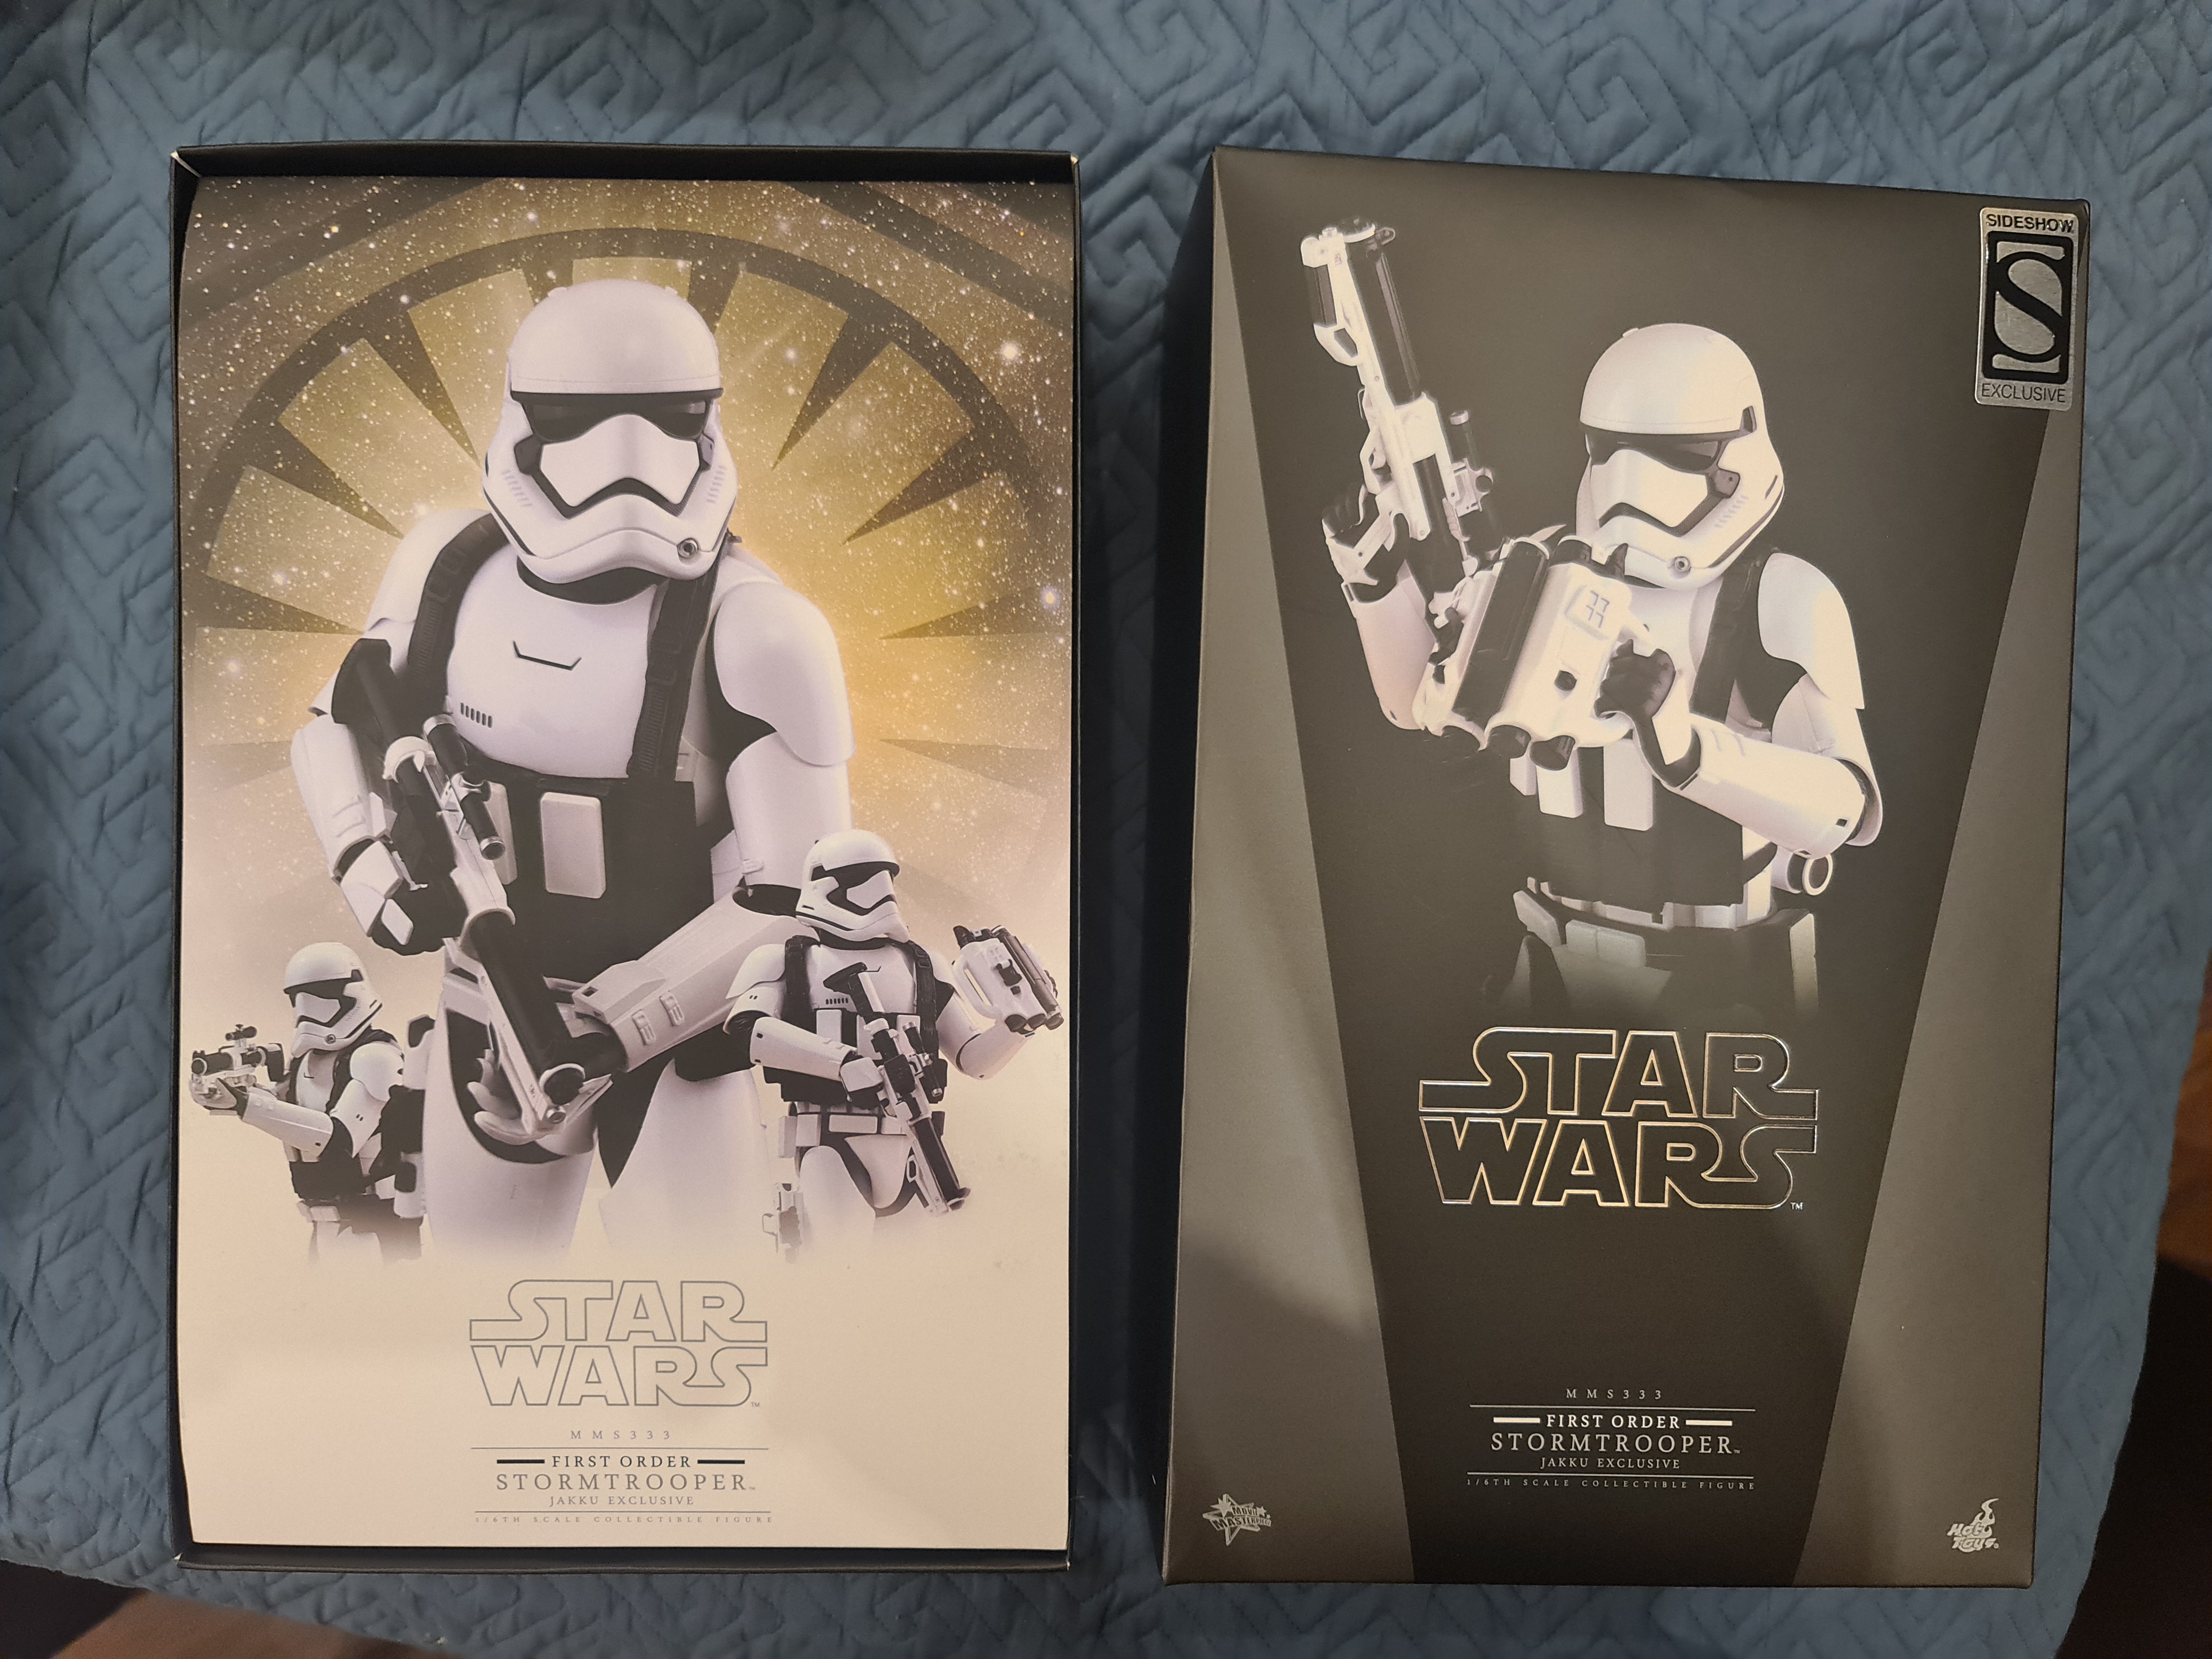 Hot Toys - First Order Stormtrooper Jakku Exclusive - 1:6 Scale Collectible - MMS Series - Movie Promo Edition